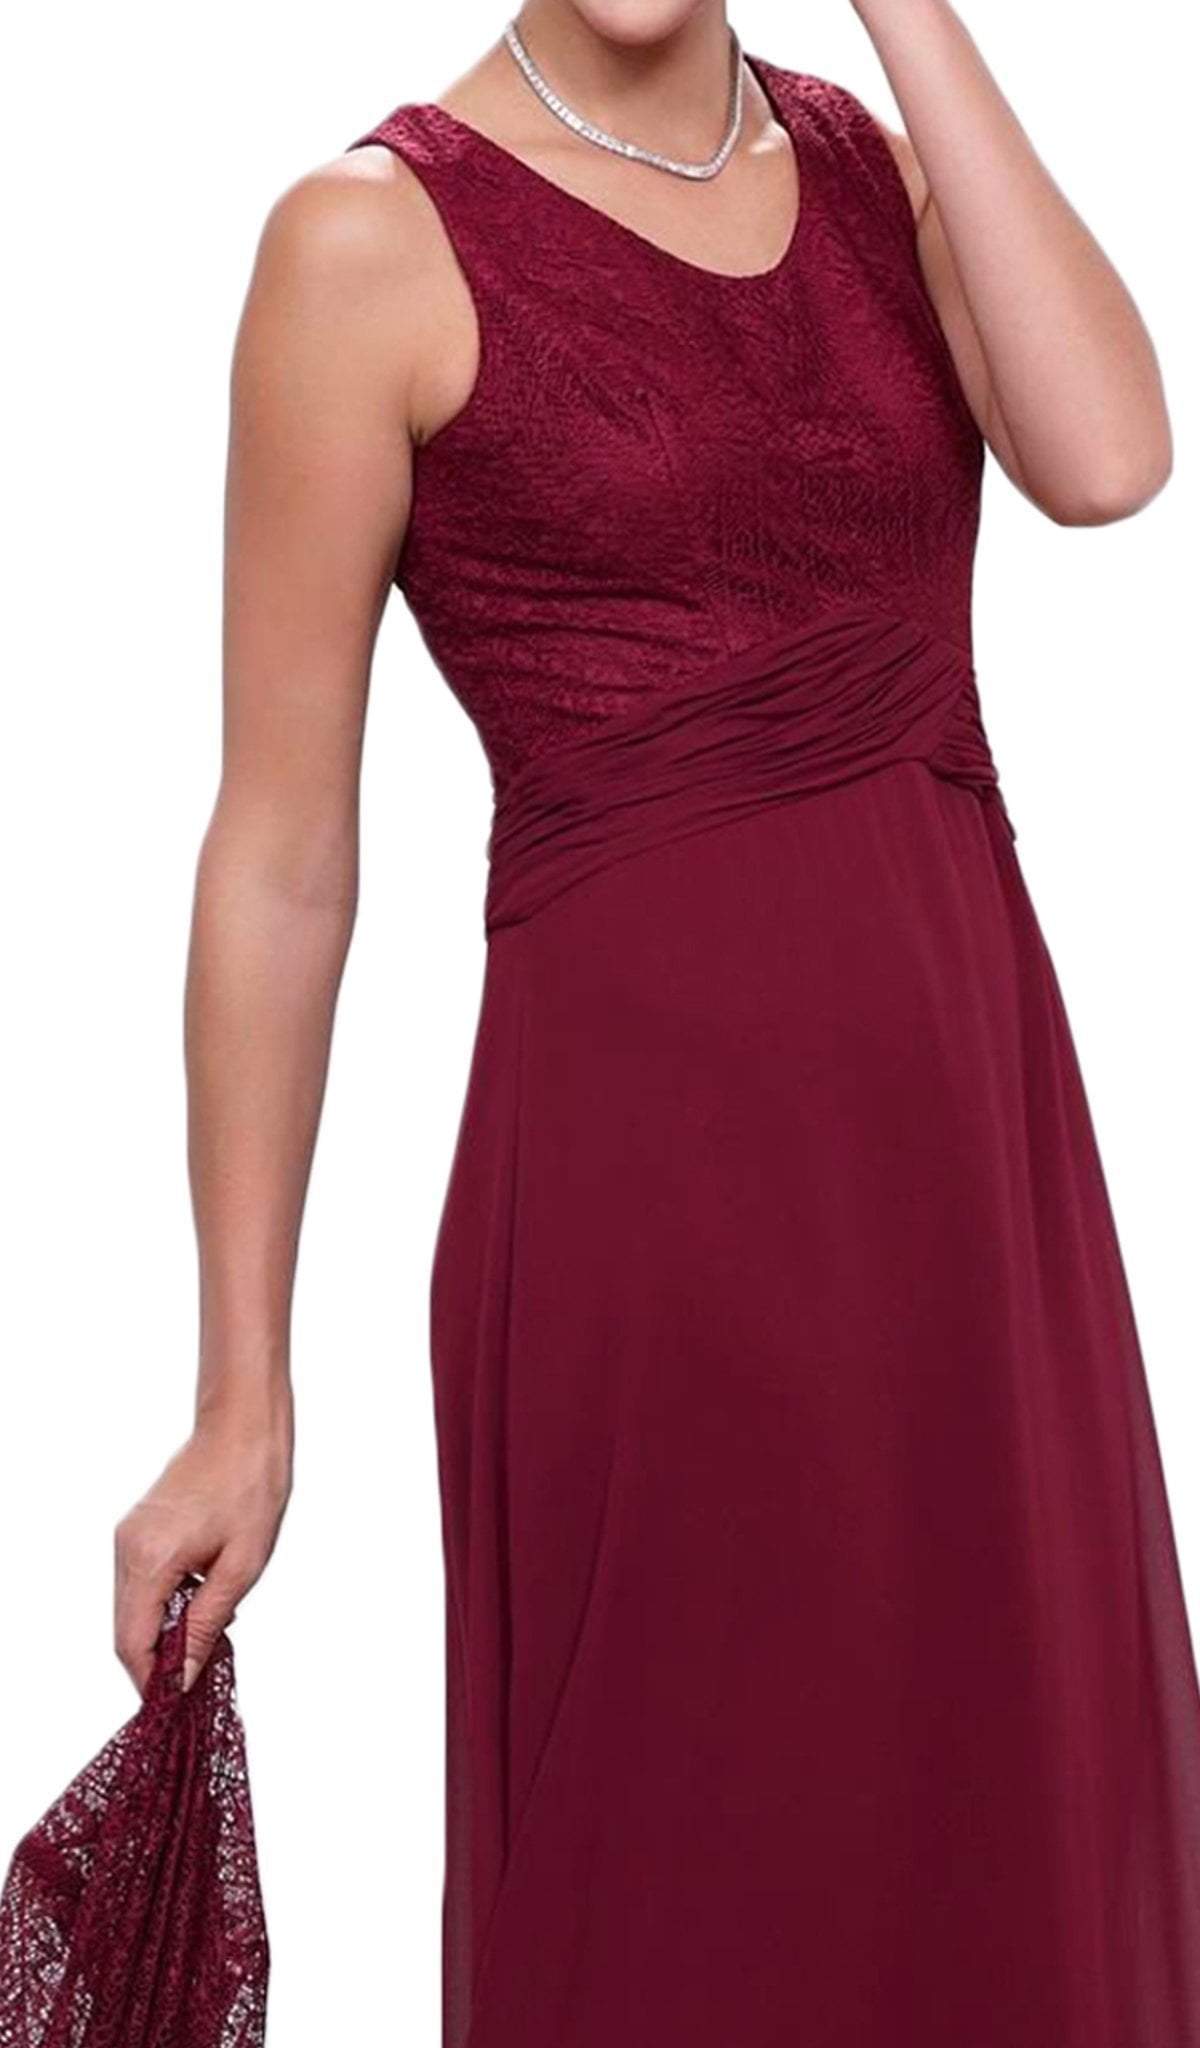 Nox Anabel - 5138 Lace Scoop Neck A-line Dress Special Occasion Dress